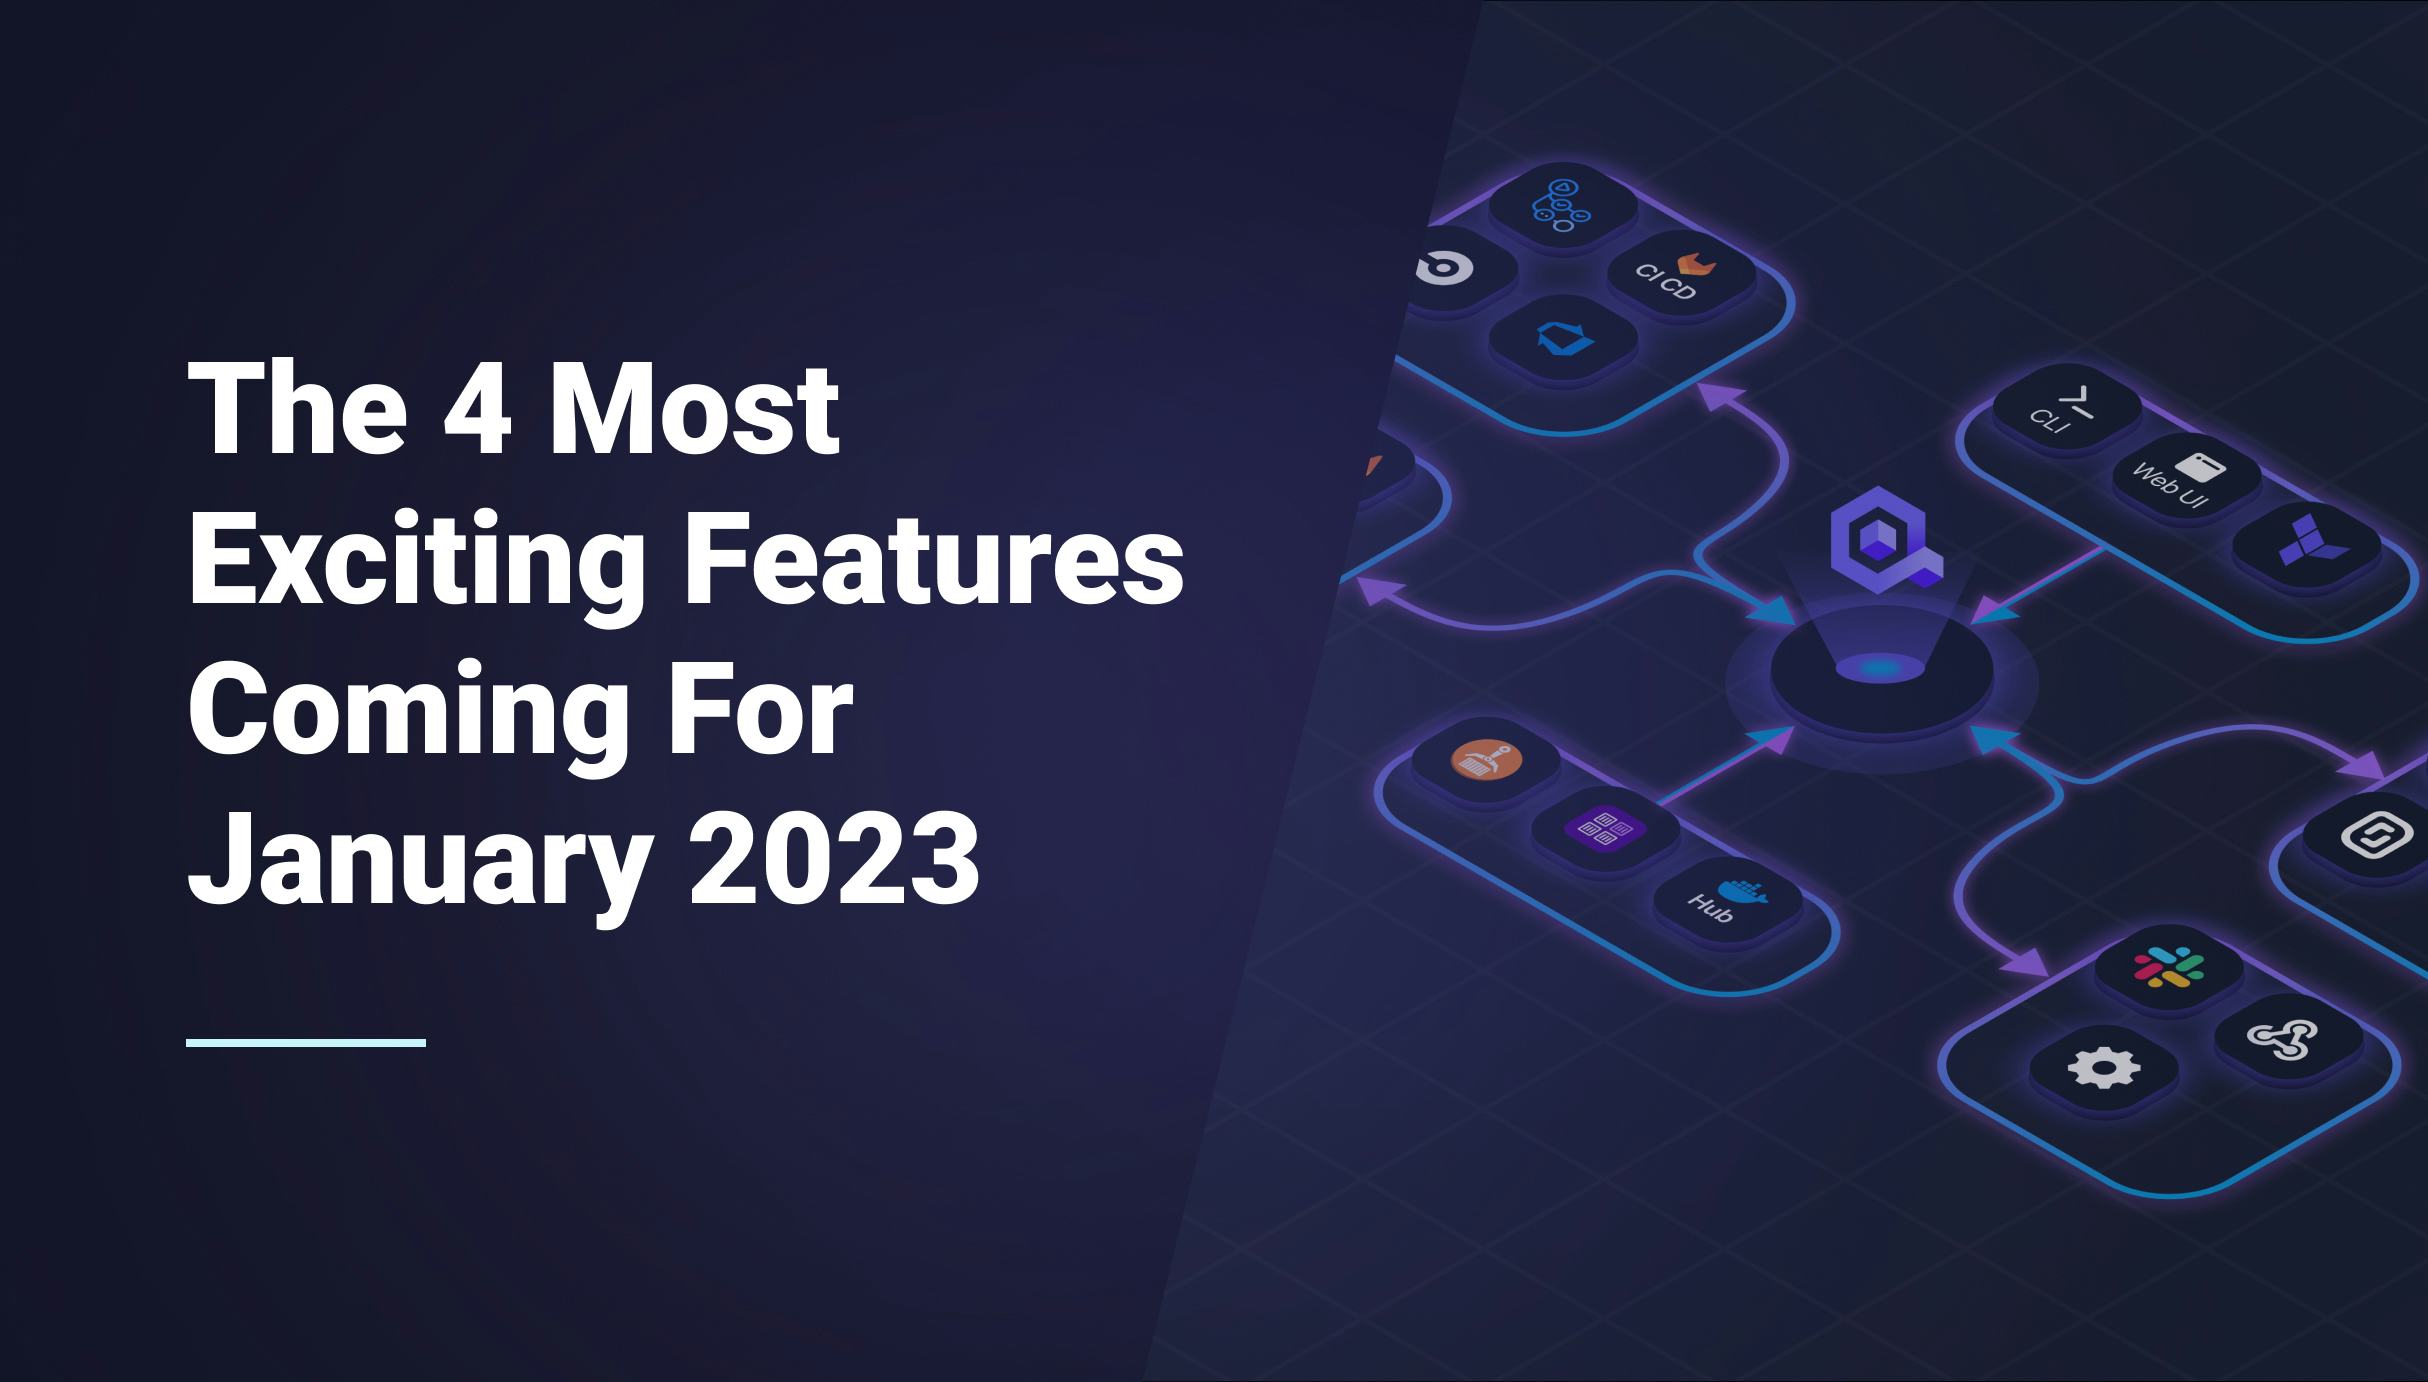 The 4 Most Exciting Features Coming For January 2023 - Qovery